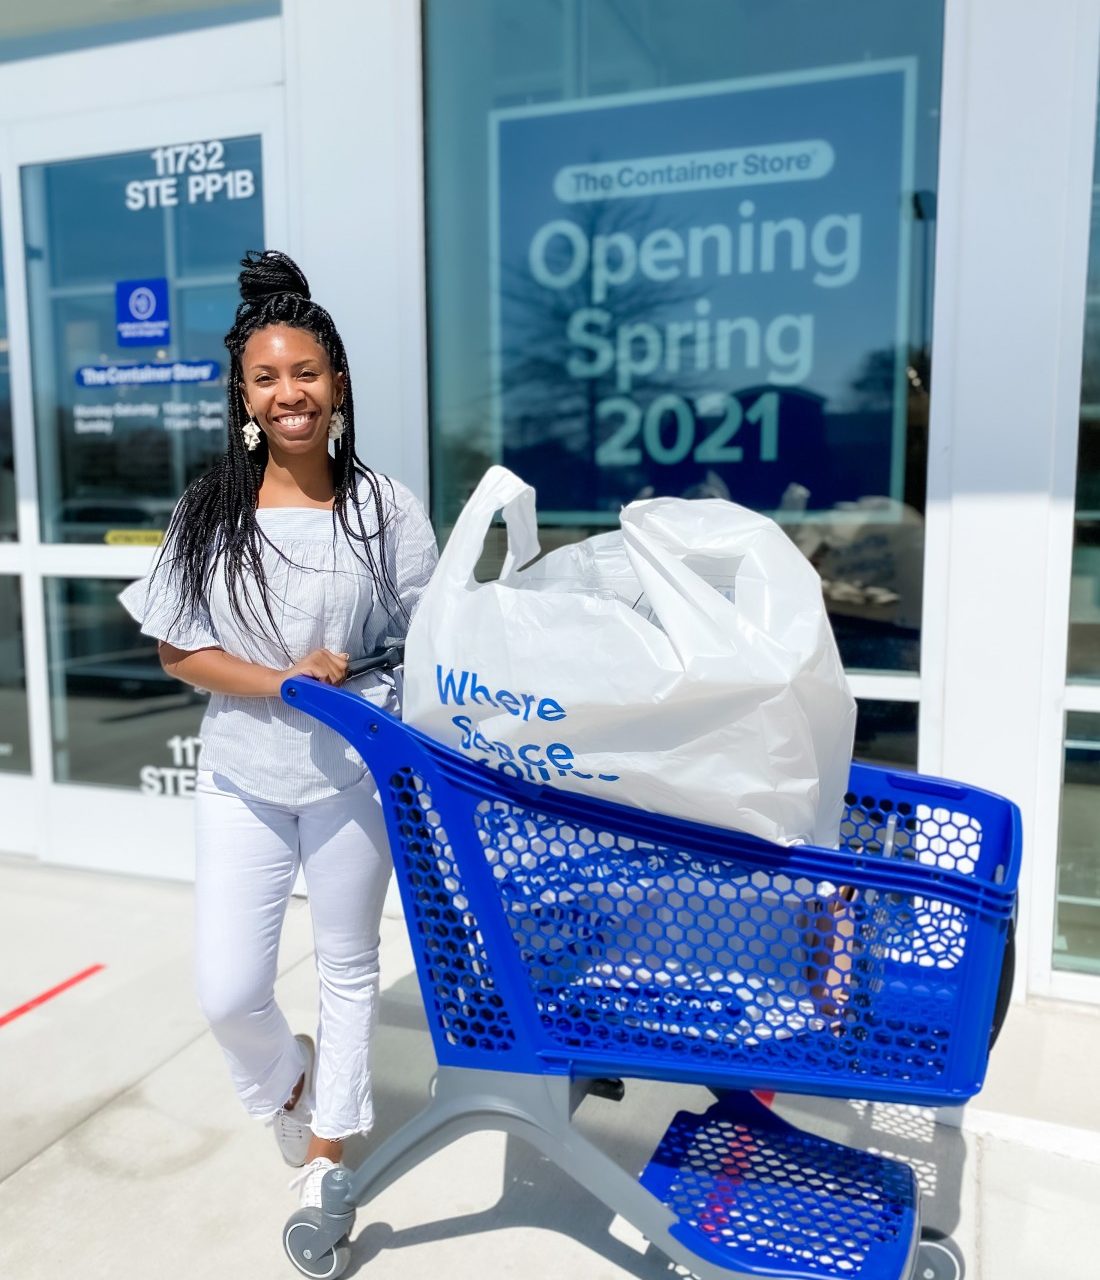 The Container Store Grand Opening Influencer Campaign